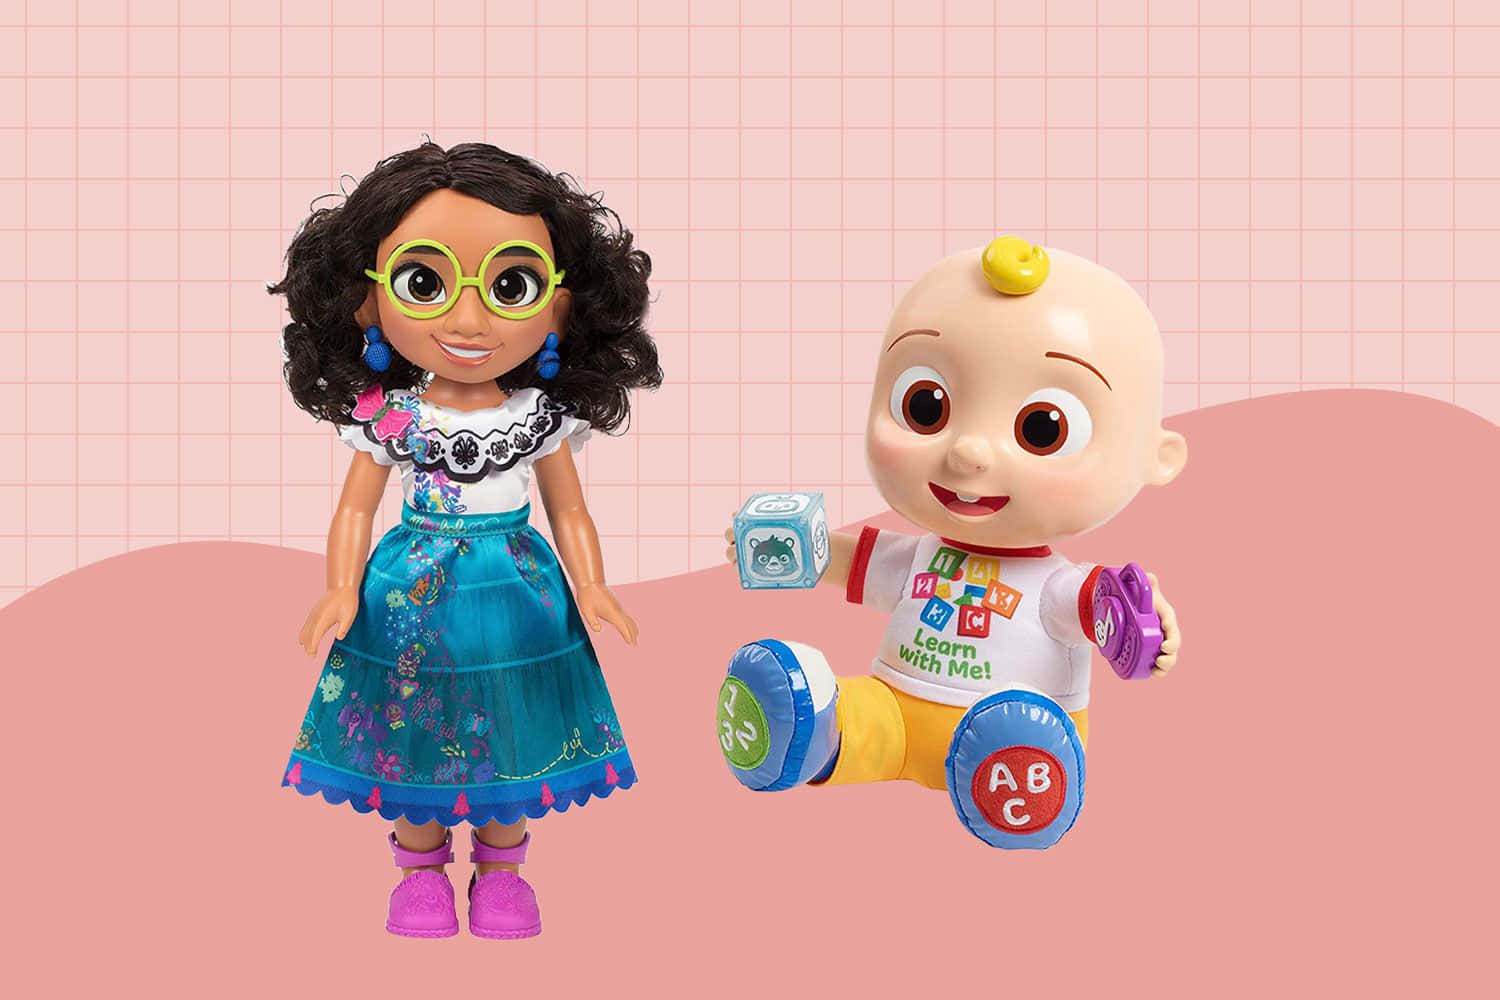 A Baby Doll And A Baby Doll Standing Next To Each Other